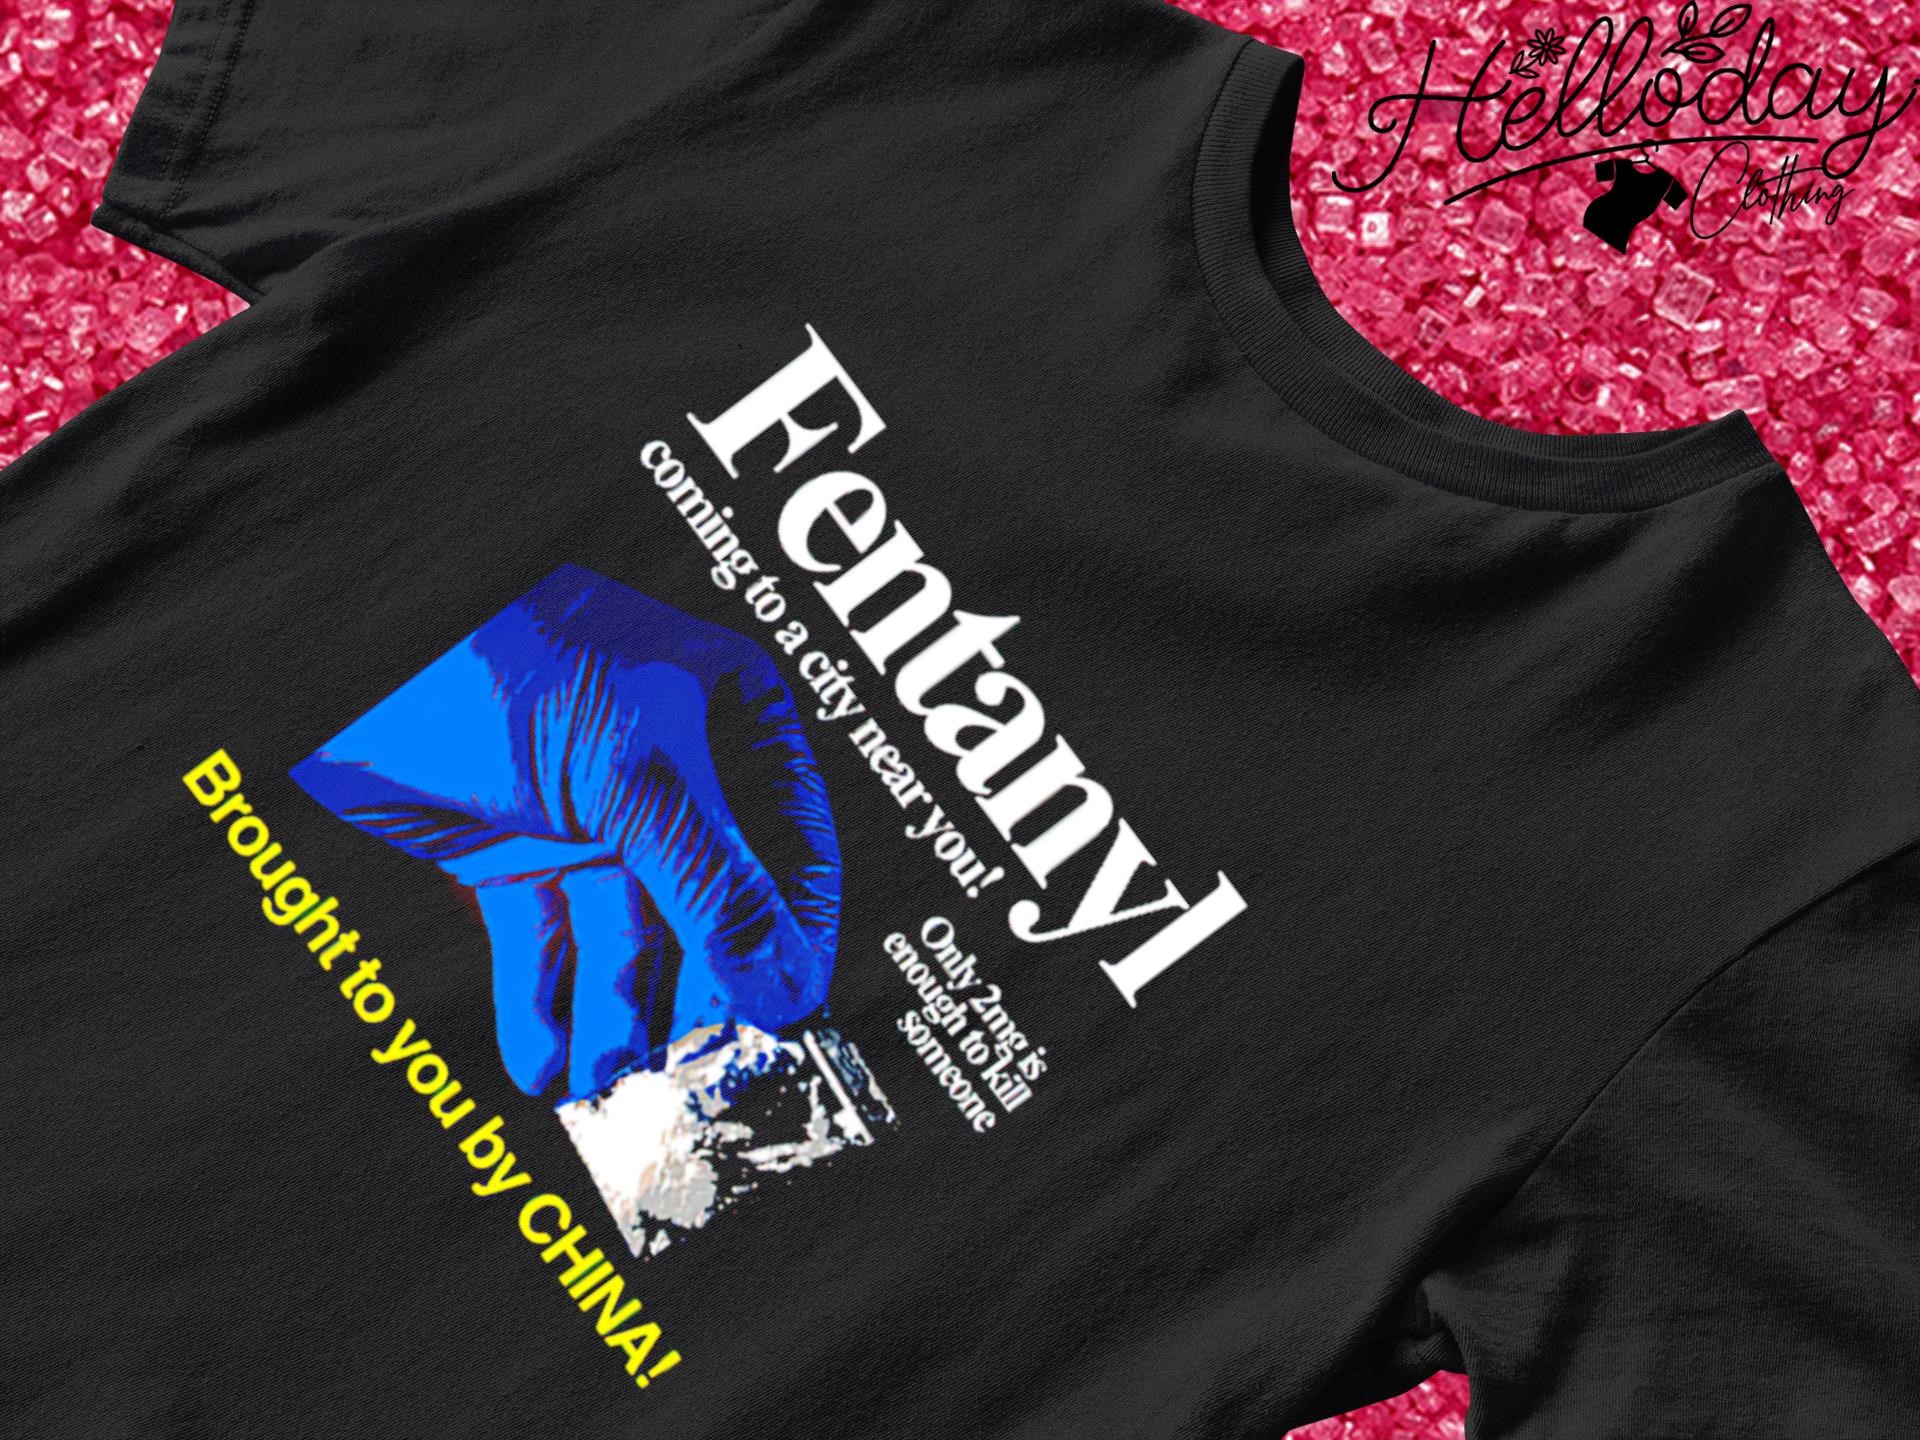 Fentanyl coming to a city near you only 2mg is enough to kill someone shirt